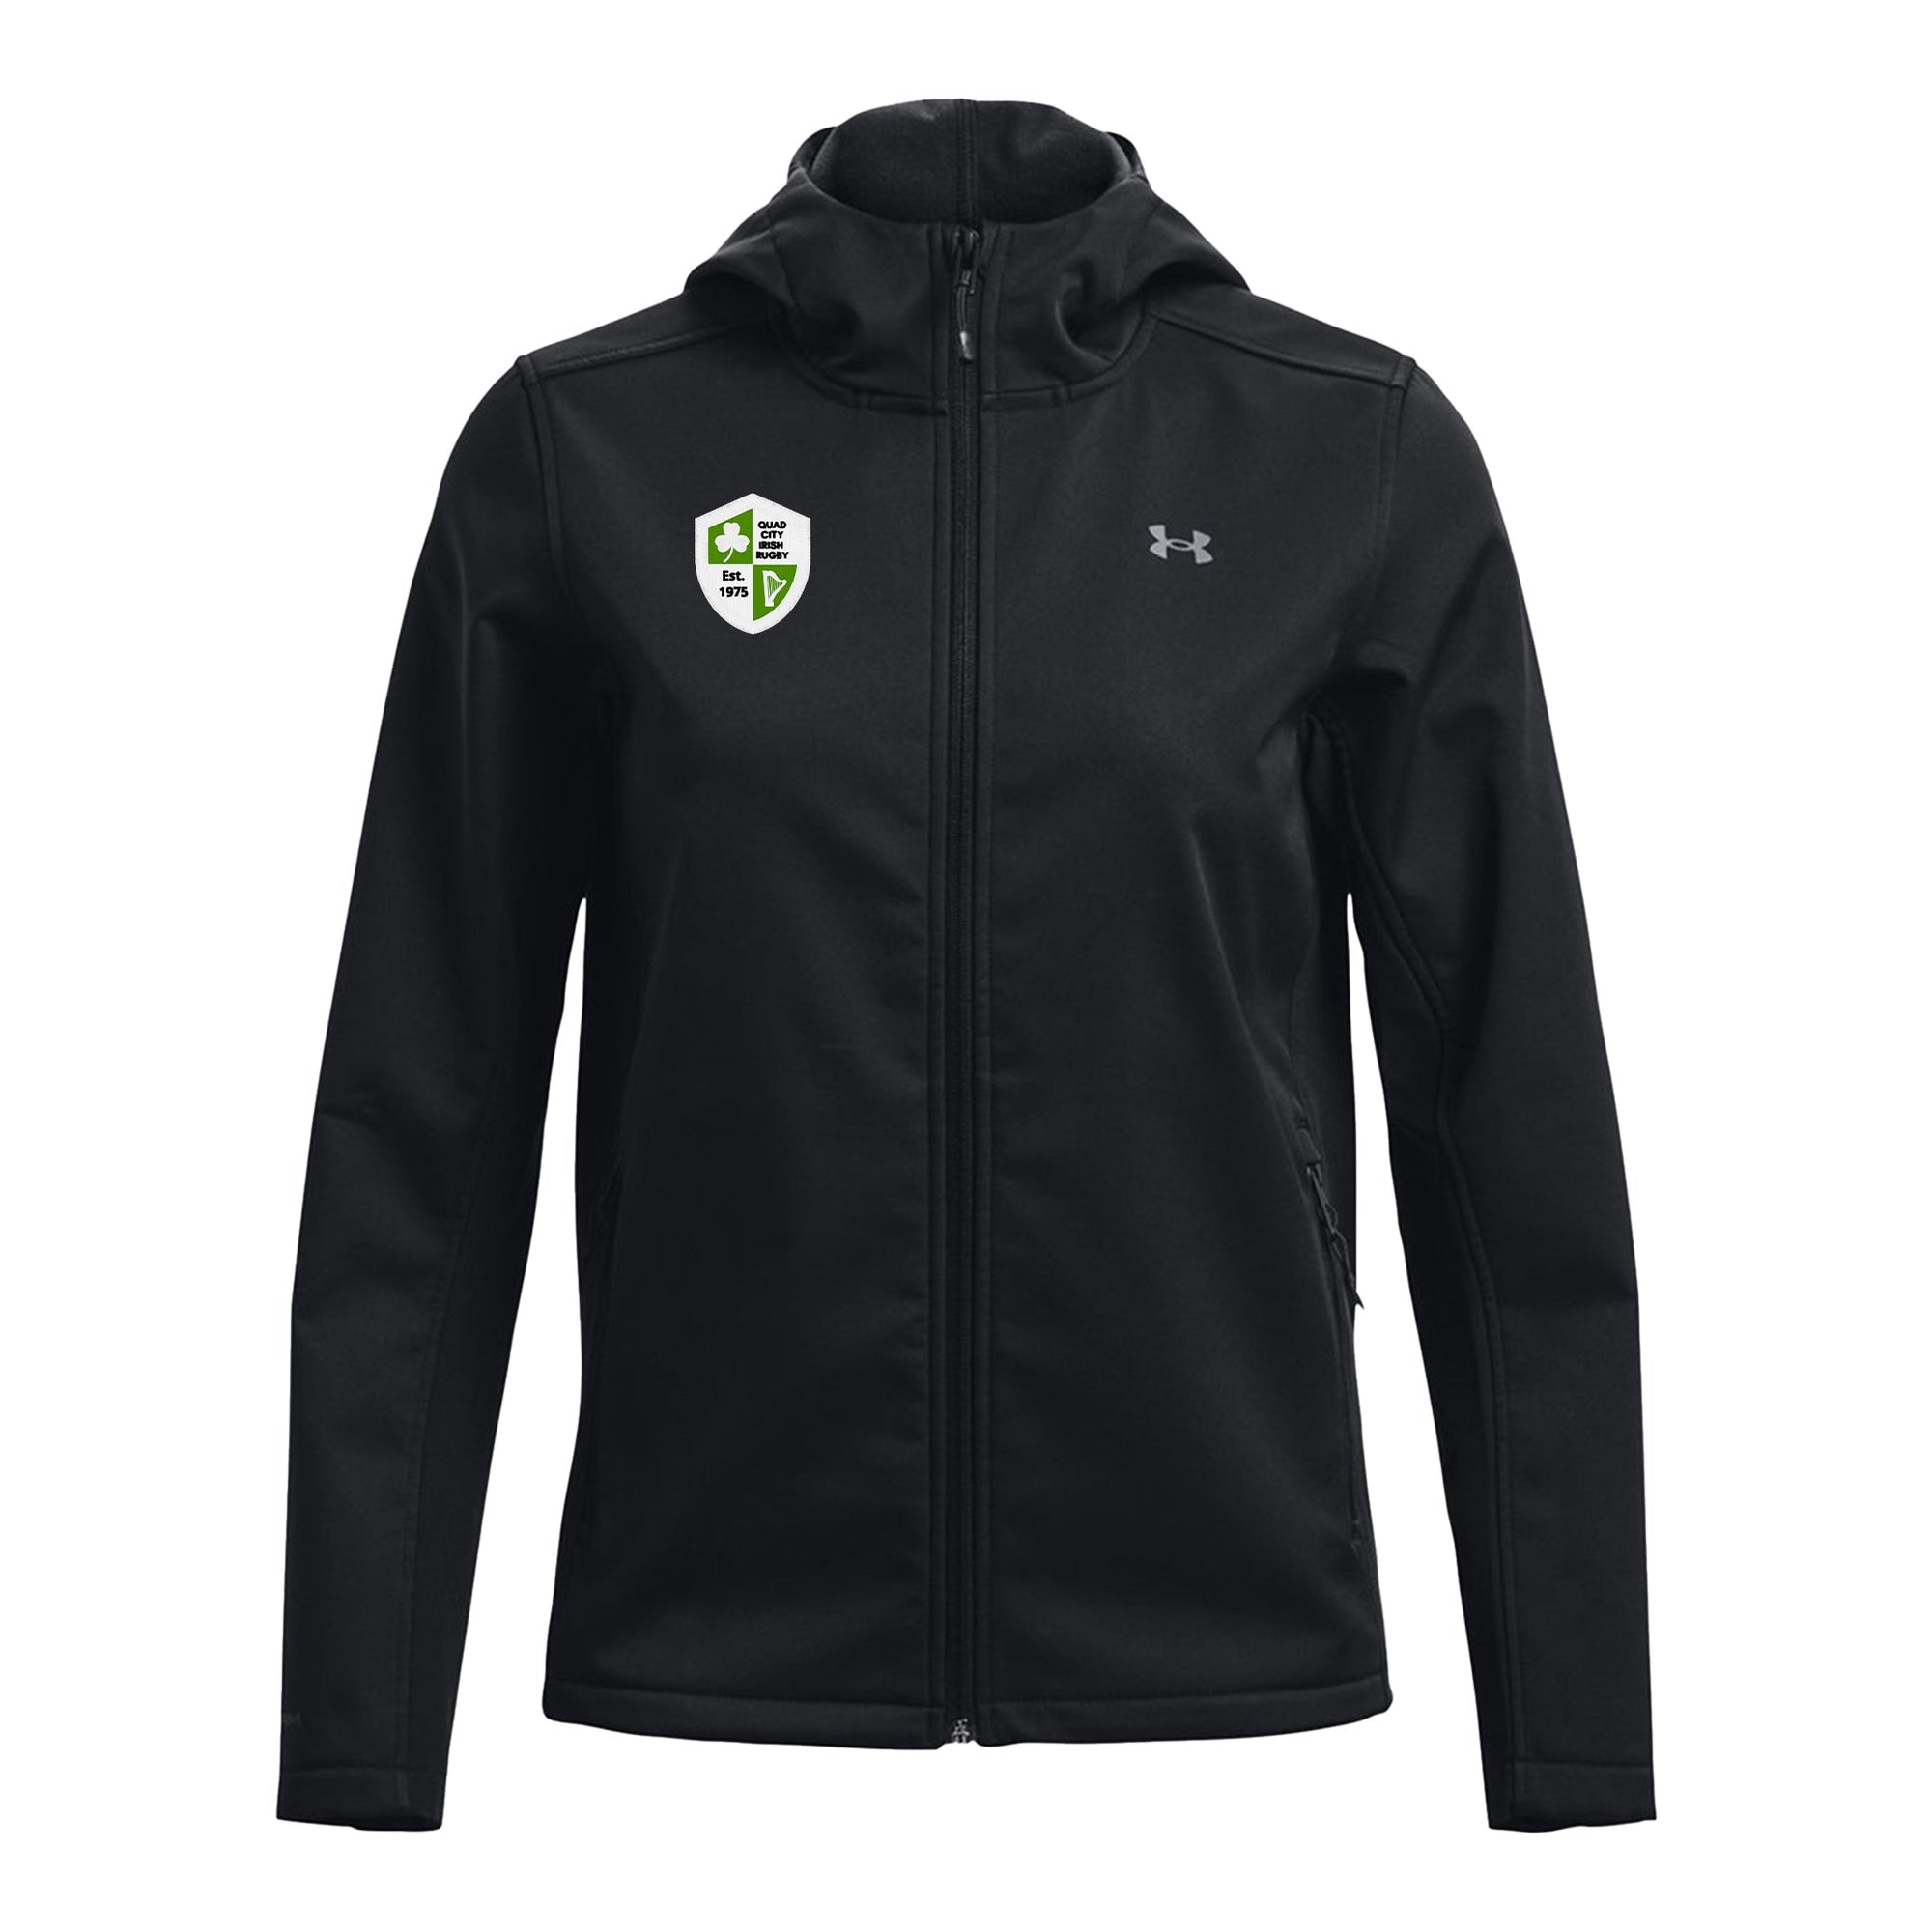 Rugby Imports Quad City Irish Women's Coldgear Hooded Infrared Jacket